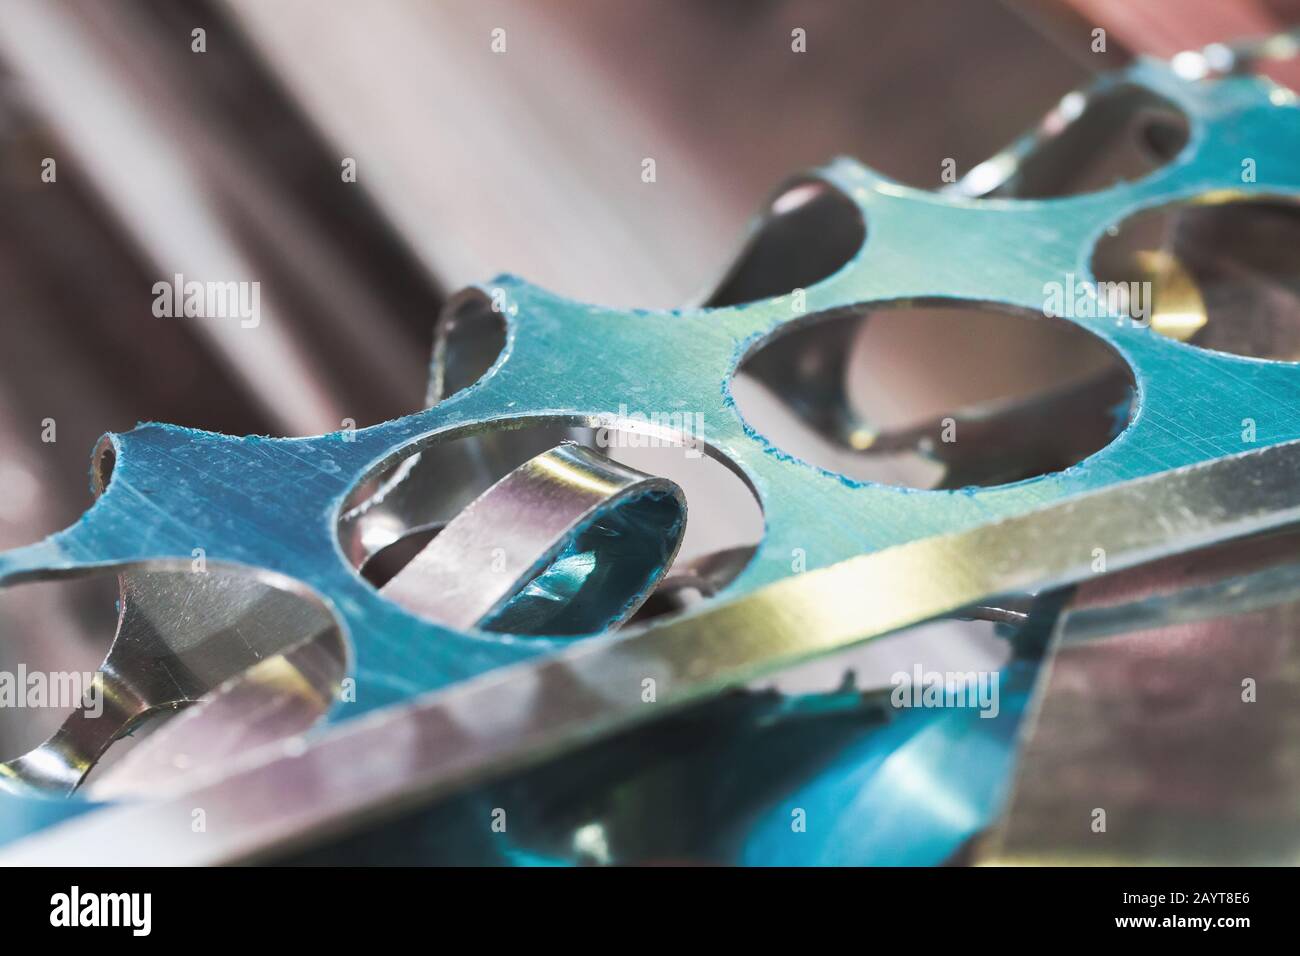 Aluminium sheet scraps with holes and blue protective film, production waste close-up photo Stock Photo